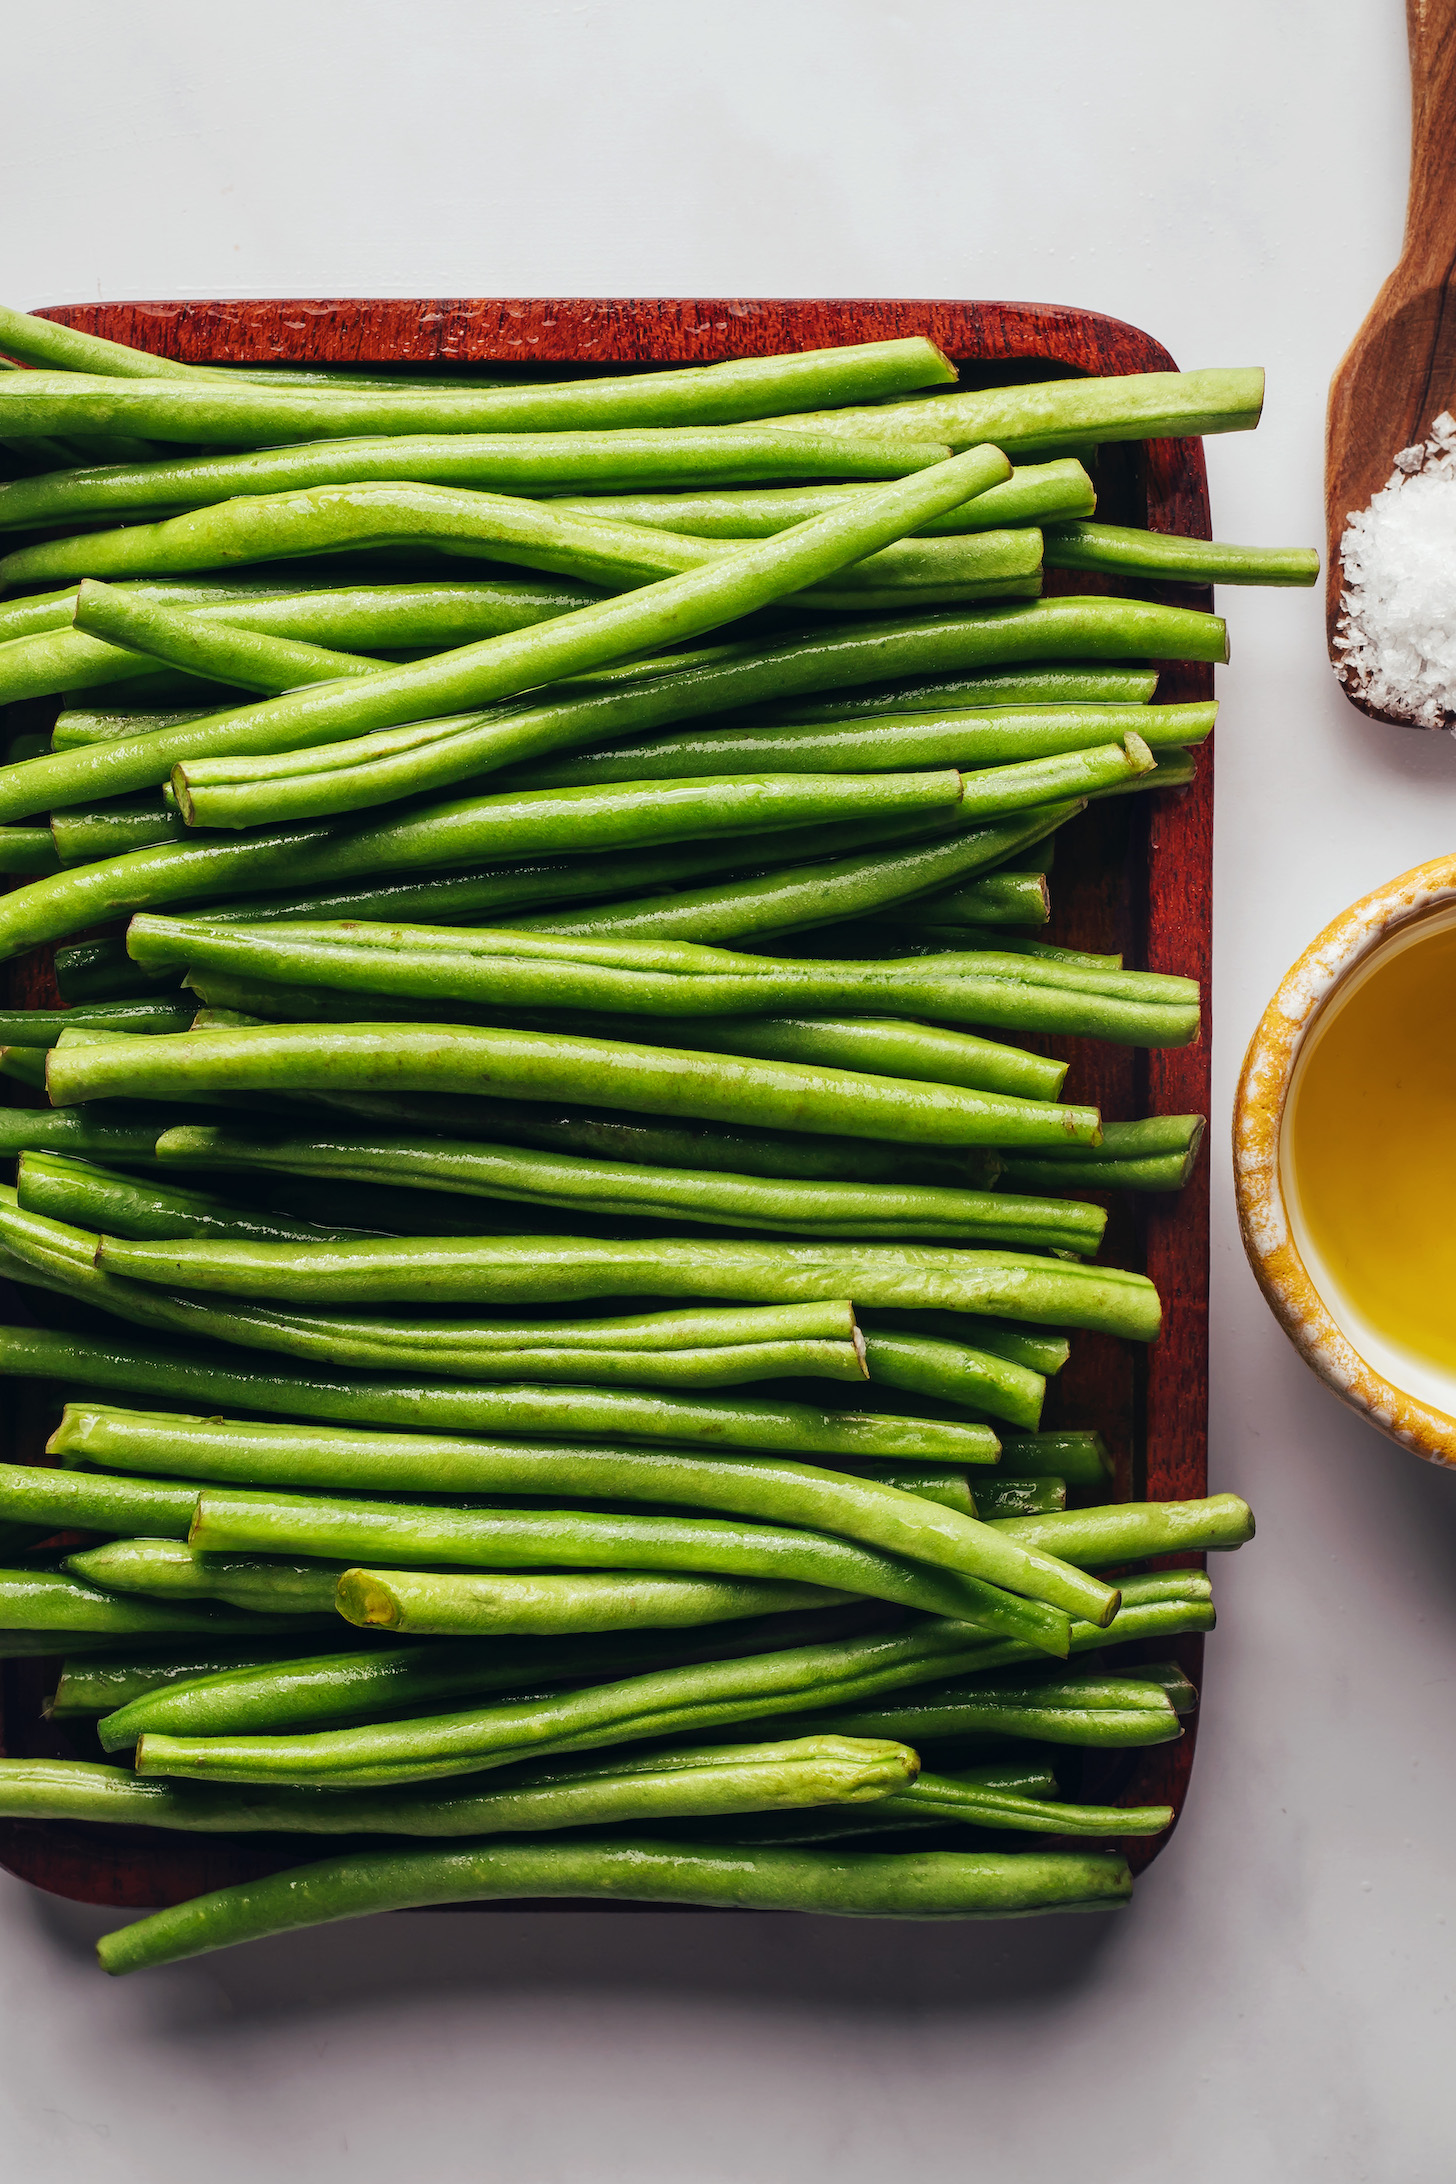 Green beans, salt and olive oil